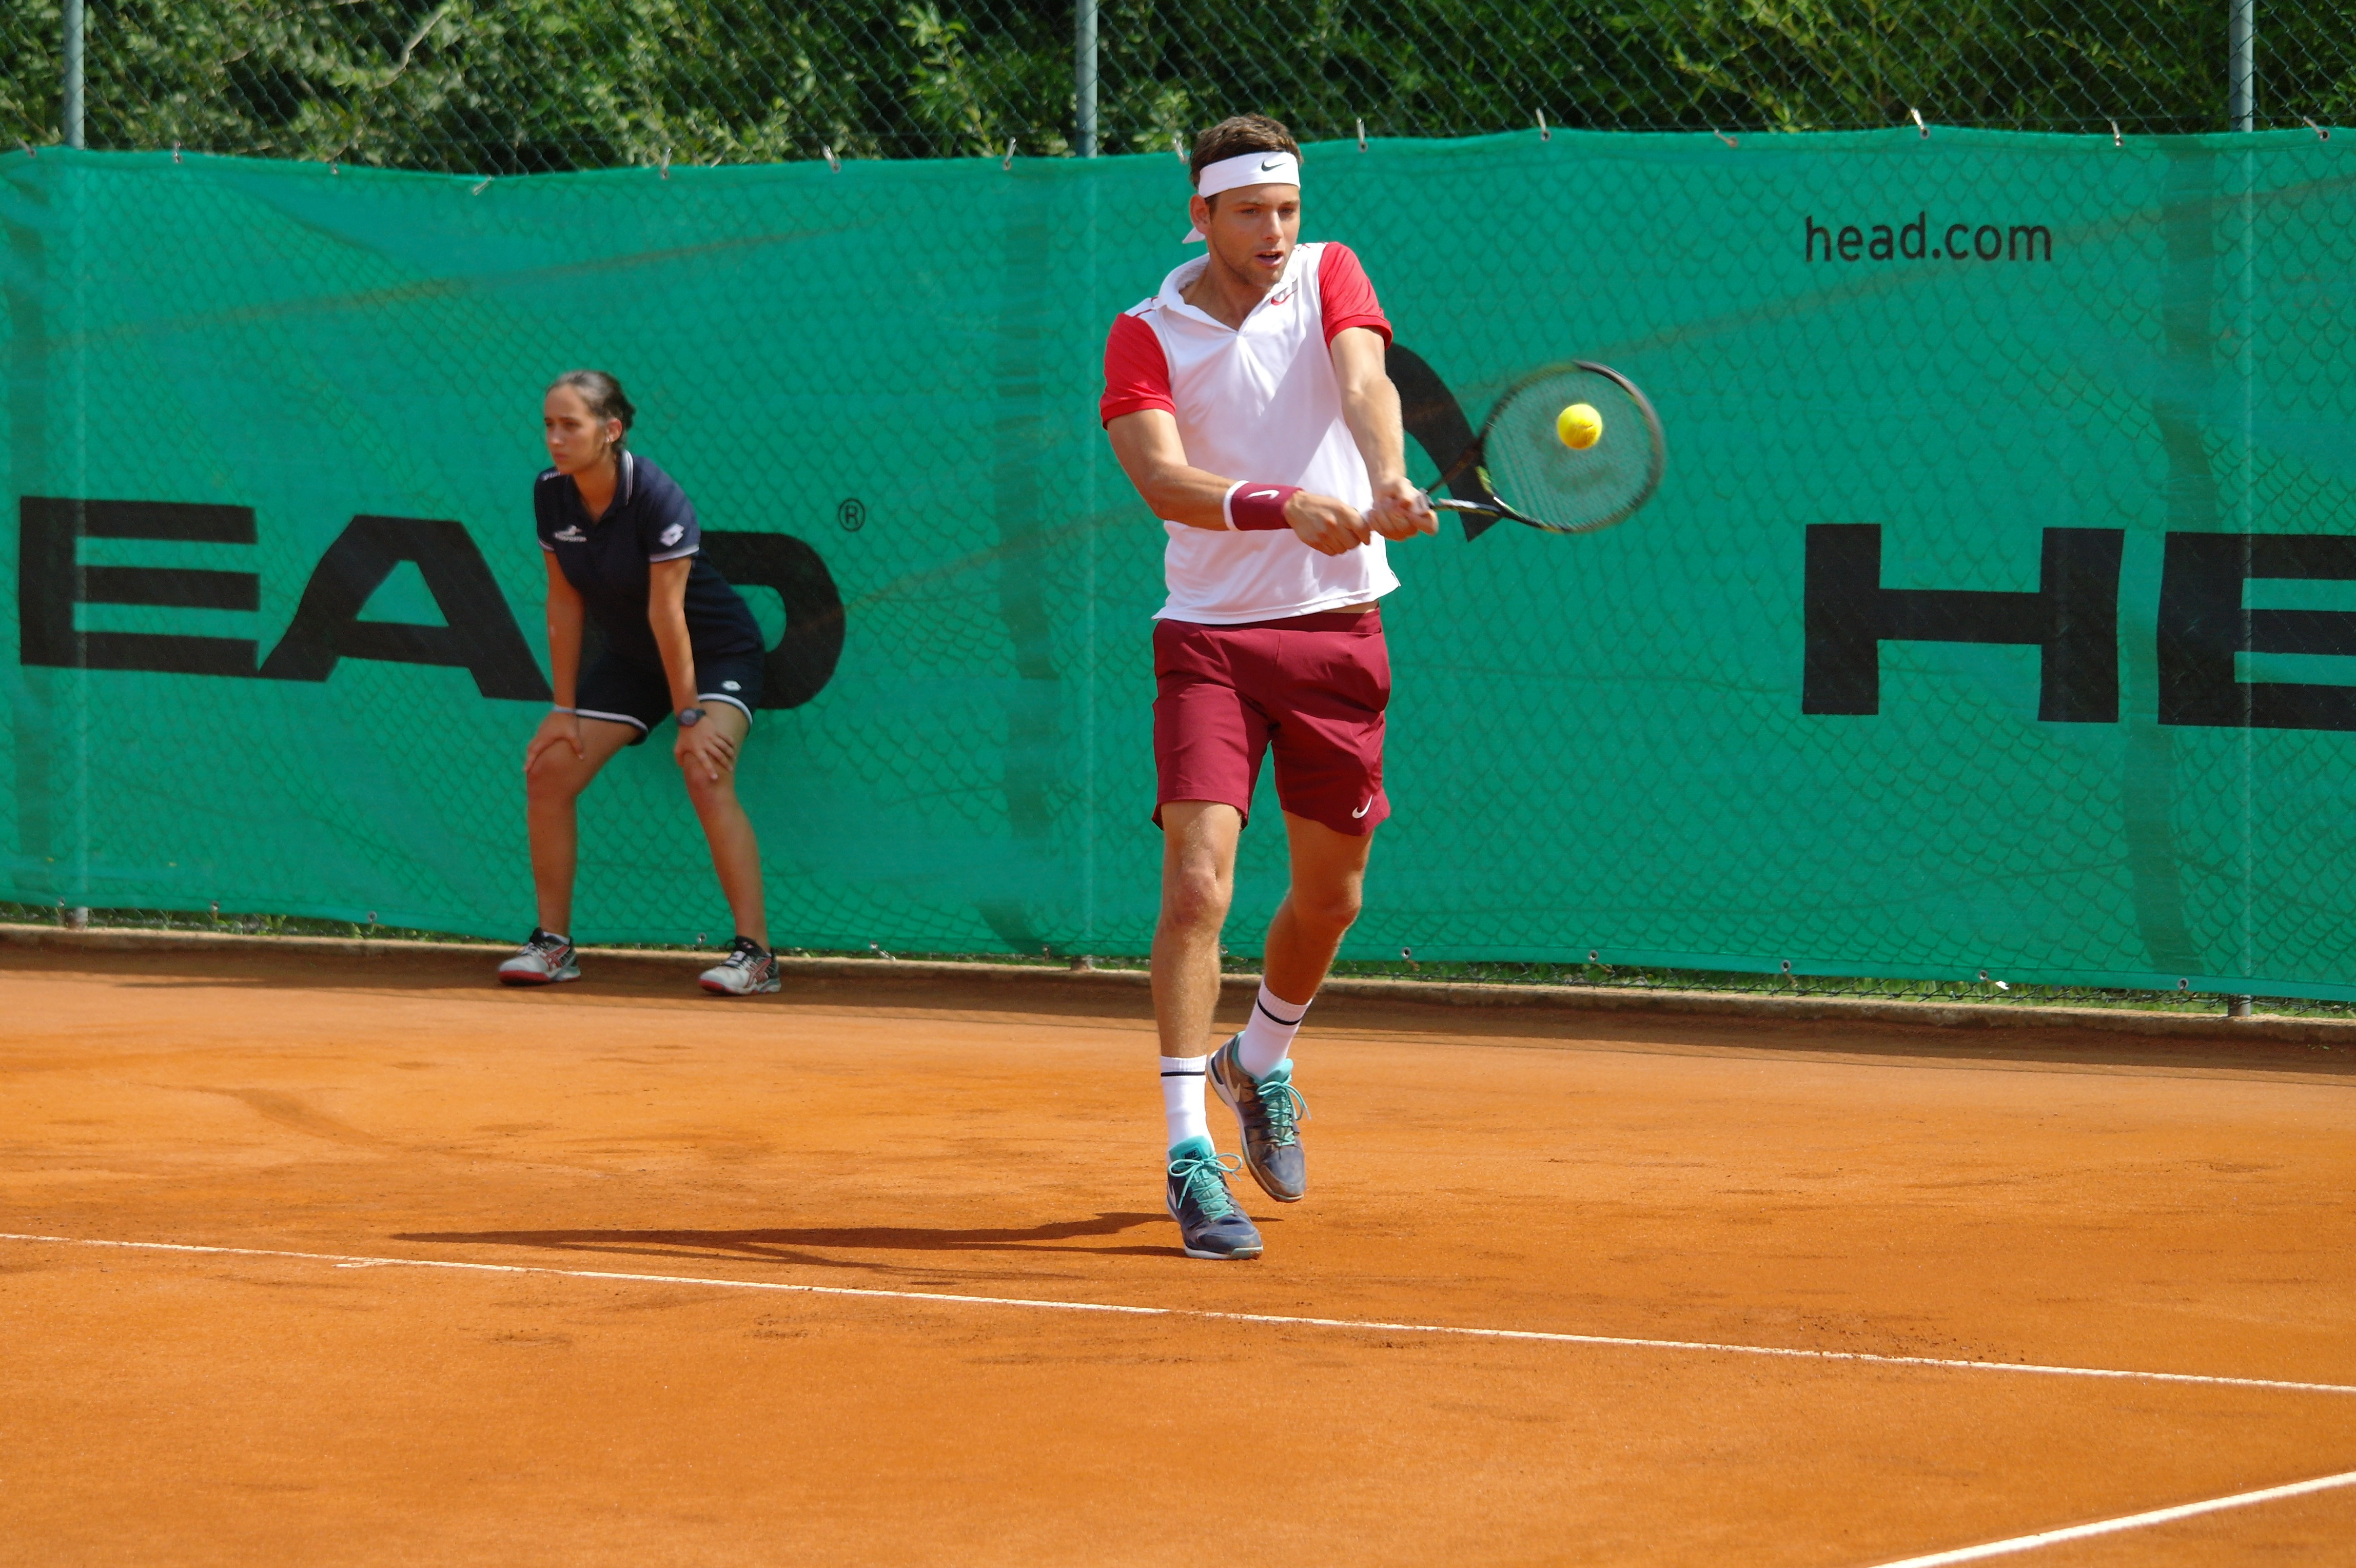 Man Hitting a Volley Shot in Tennis  image Free stock 